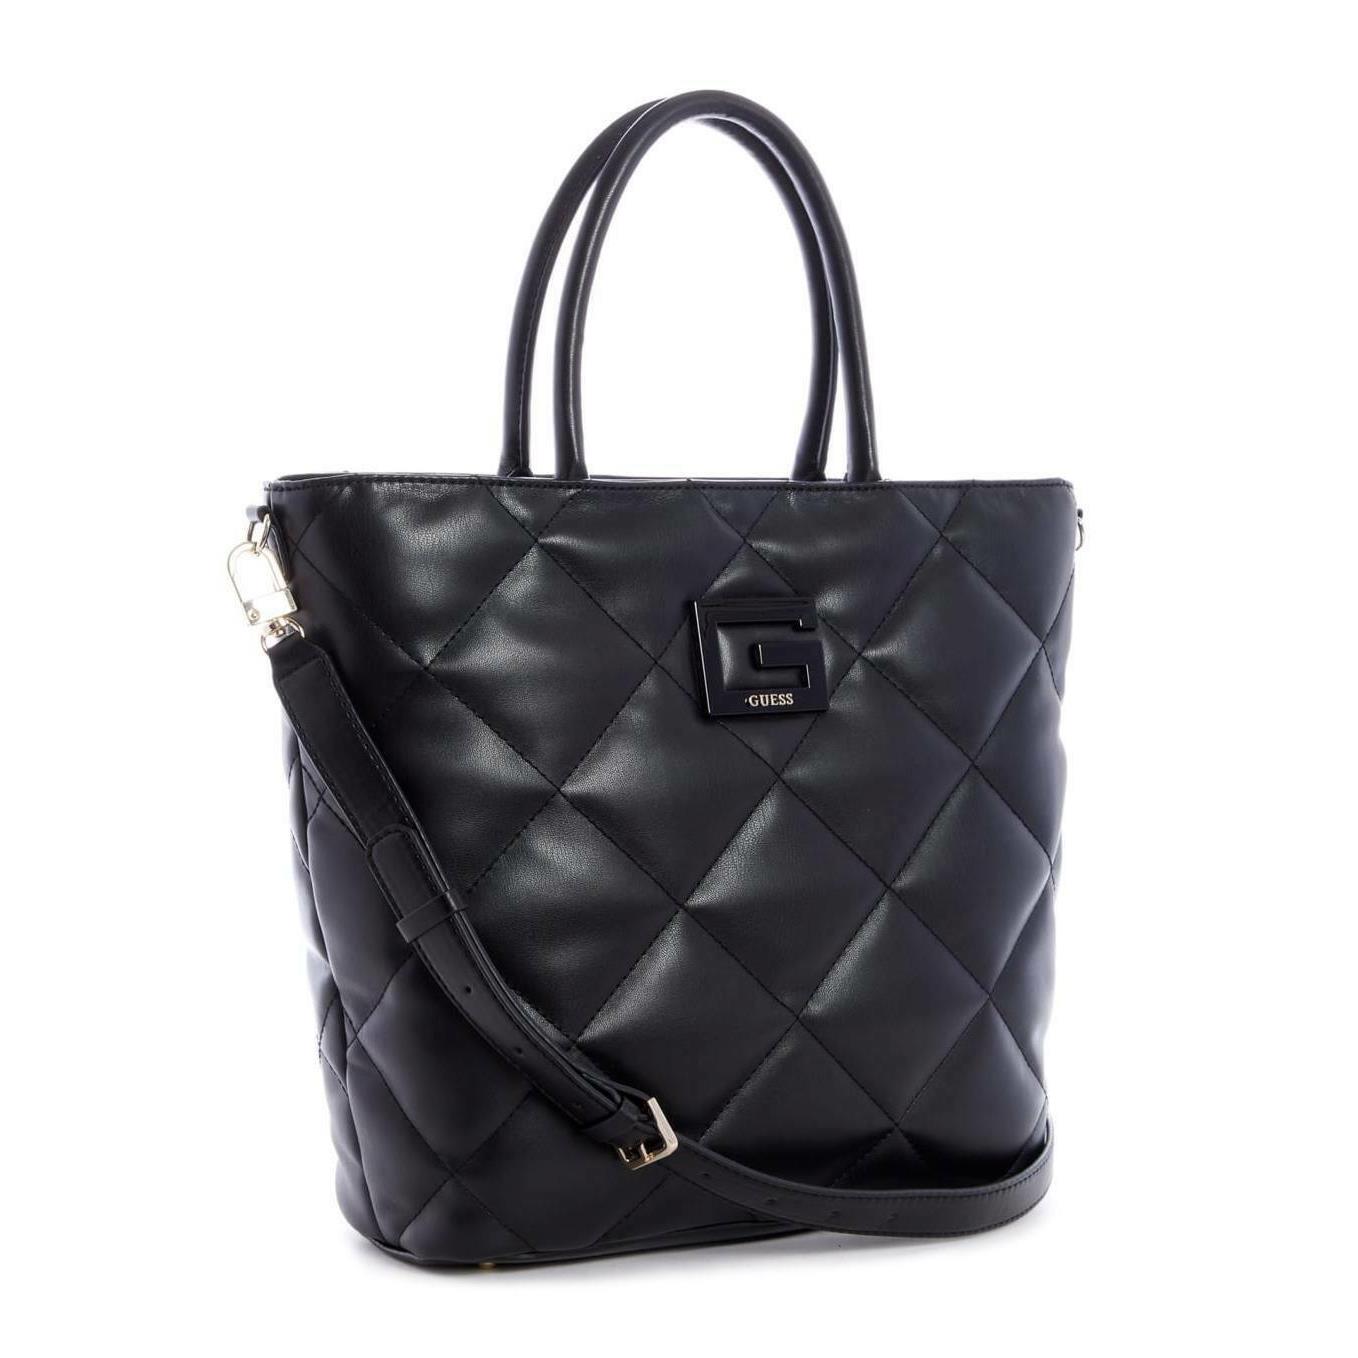 Guess Brightside Small Tote Bag in Black